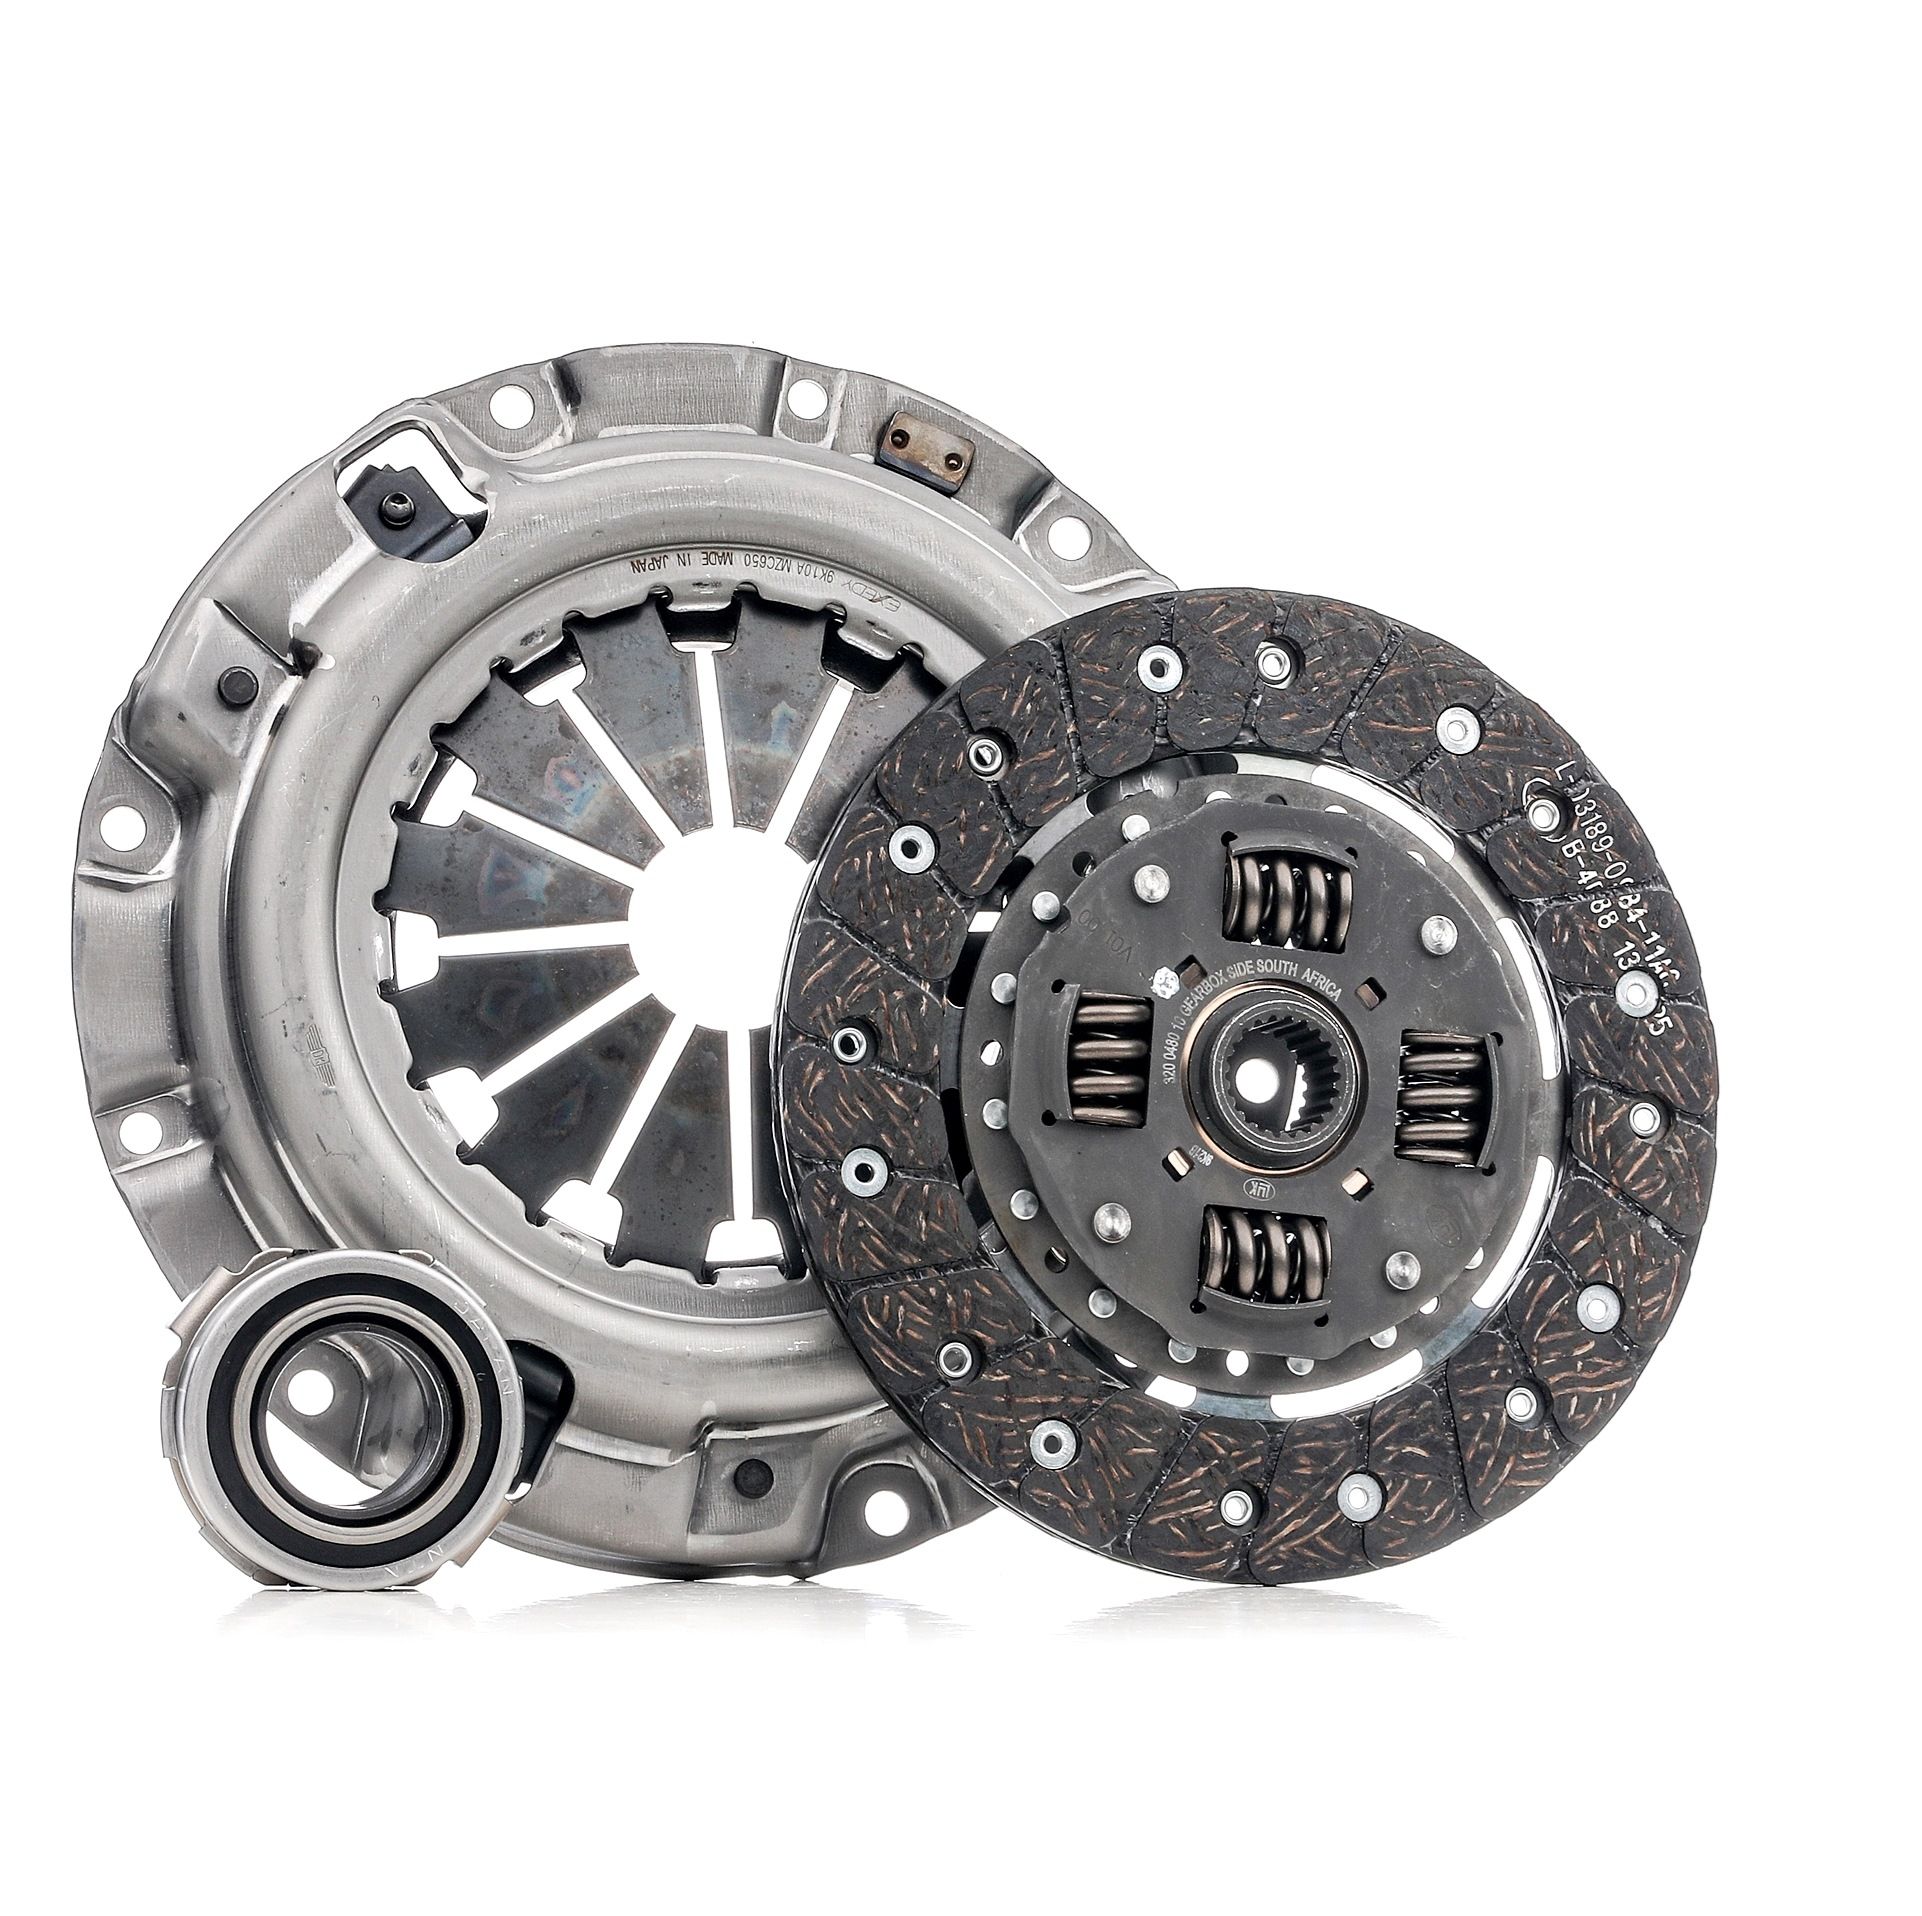 LuK BR 0222 620 3126 00 Clutch kit with clutch release bearing, with clutch disc, 200mm